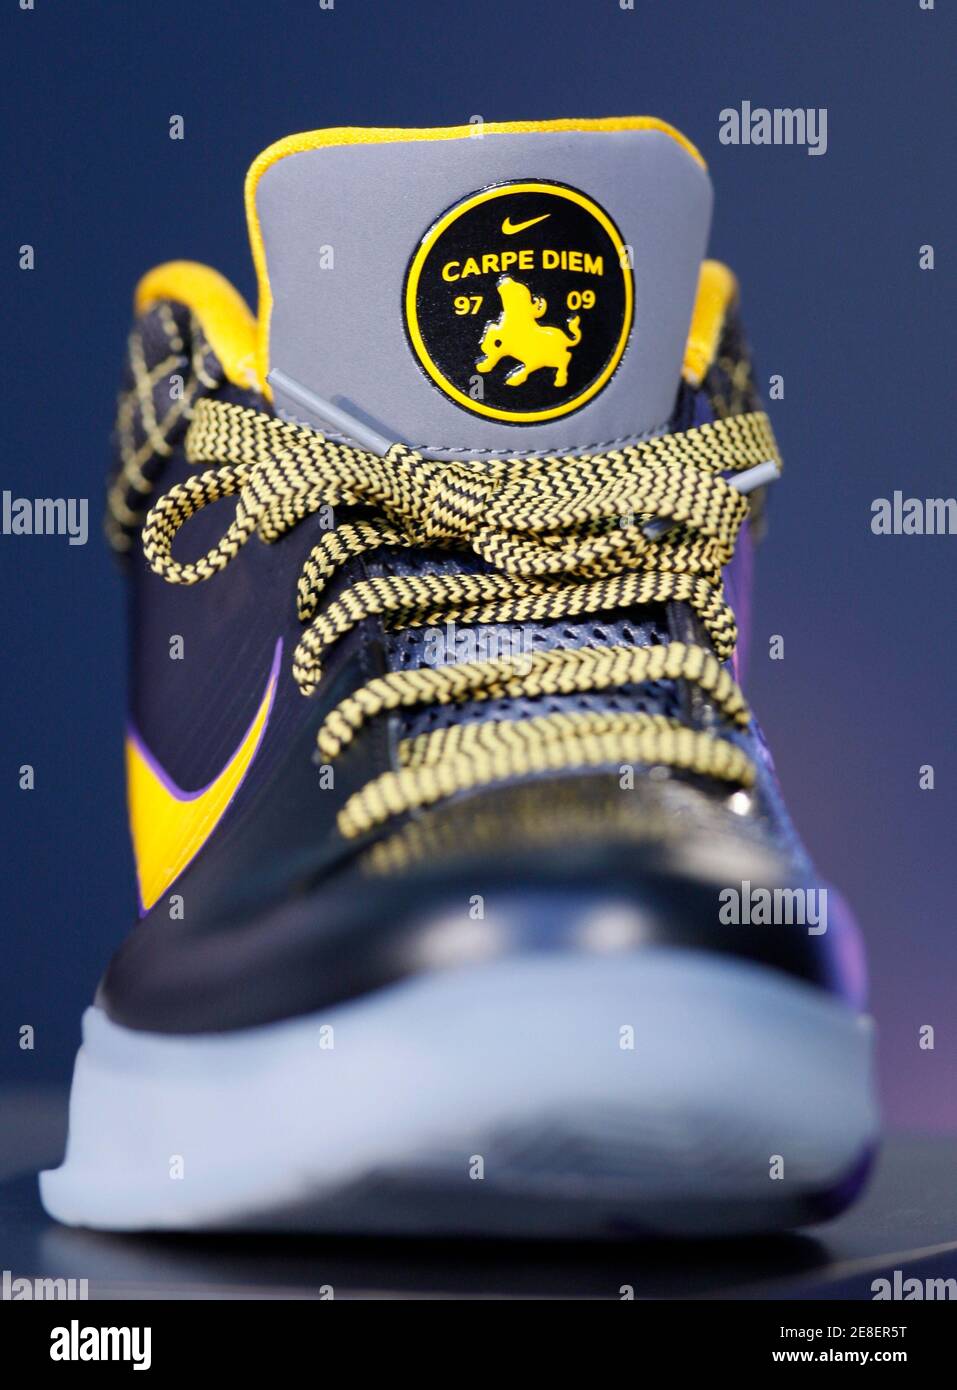 Los Angeles Lakers NBA star Kobe Bryant's new Nike Zoom Kobe IV basketball  shoe is shown in Los Angeles, December 11, 2008. The shoe with this design  will be available for sale